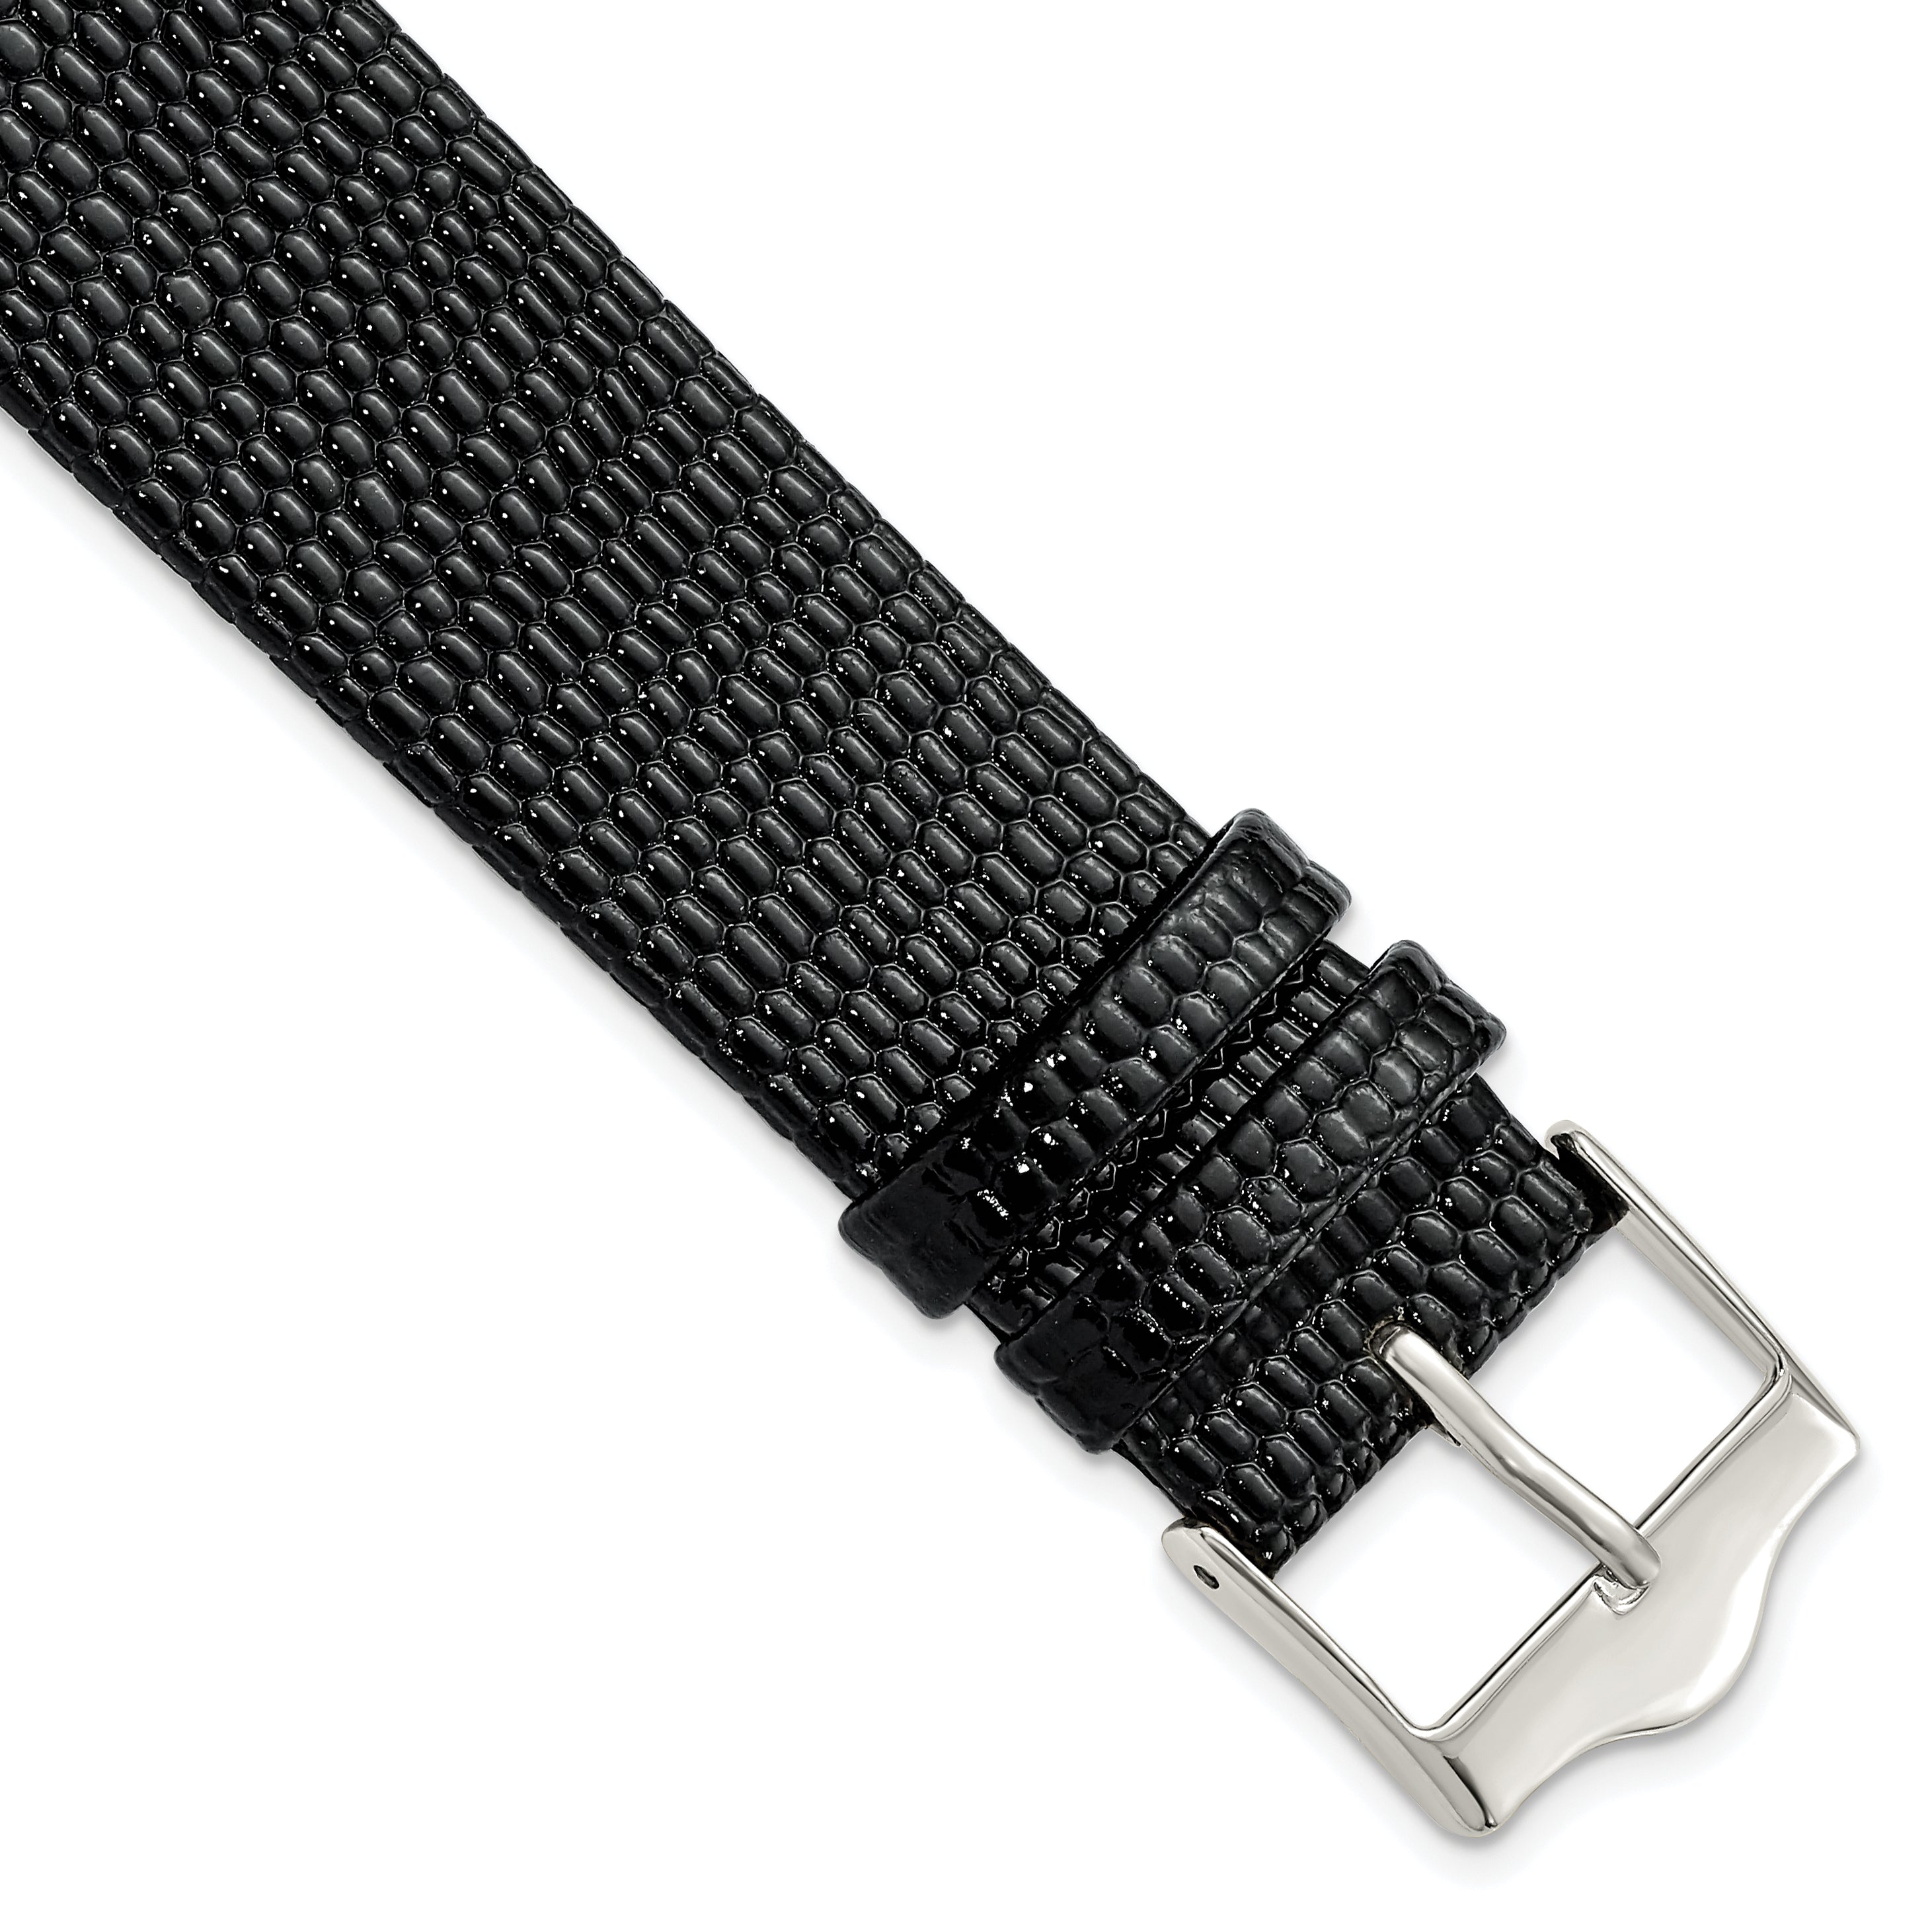 DeBeer 20mm Flat Black Lizard Grain Leather with Silver-tone Buckle 7.5 inch Watch Band